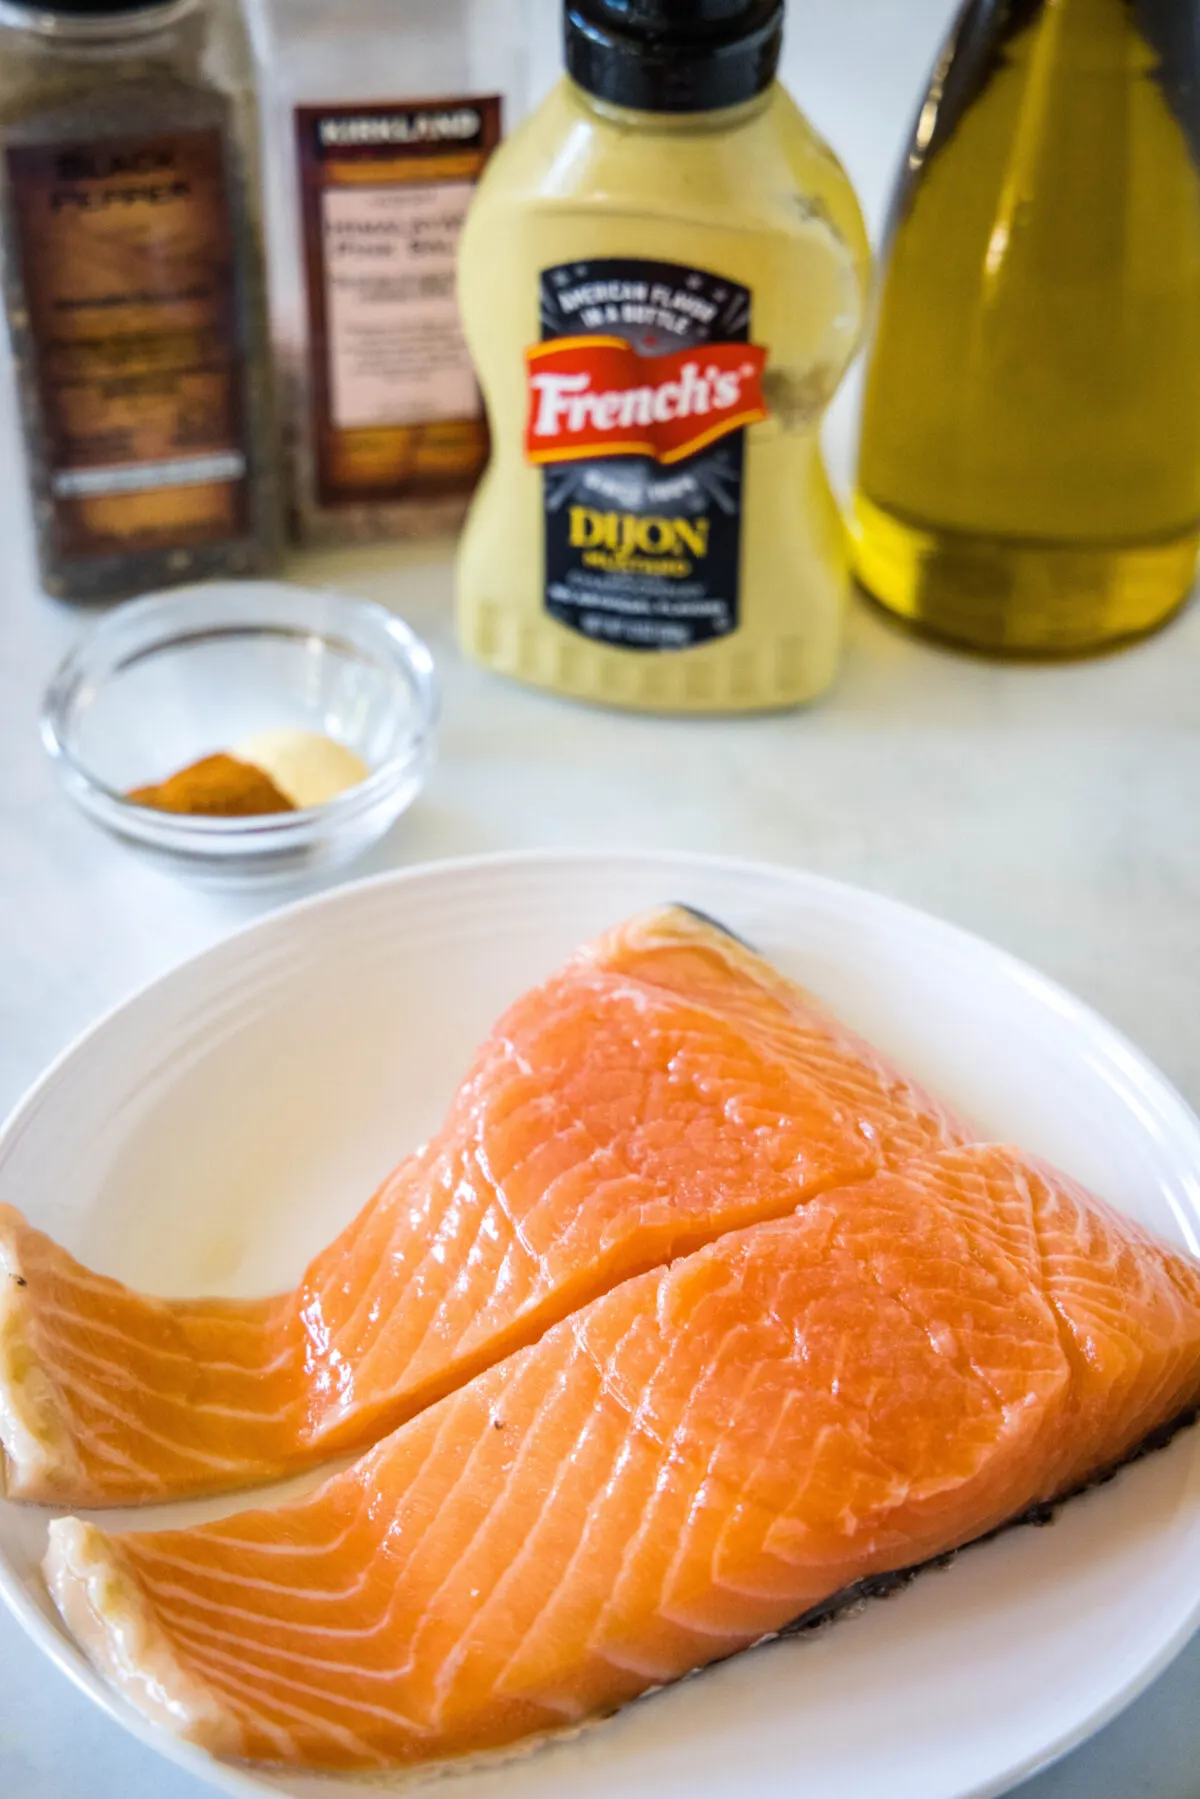 All the ingredients needed to make air fryer salmon: a plate with two salmon fillets, a bowl with garlic powder and paprika, a bottle of Dijon mustard, a bottle of olive oil, and salt and pepper grinders.